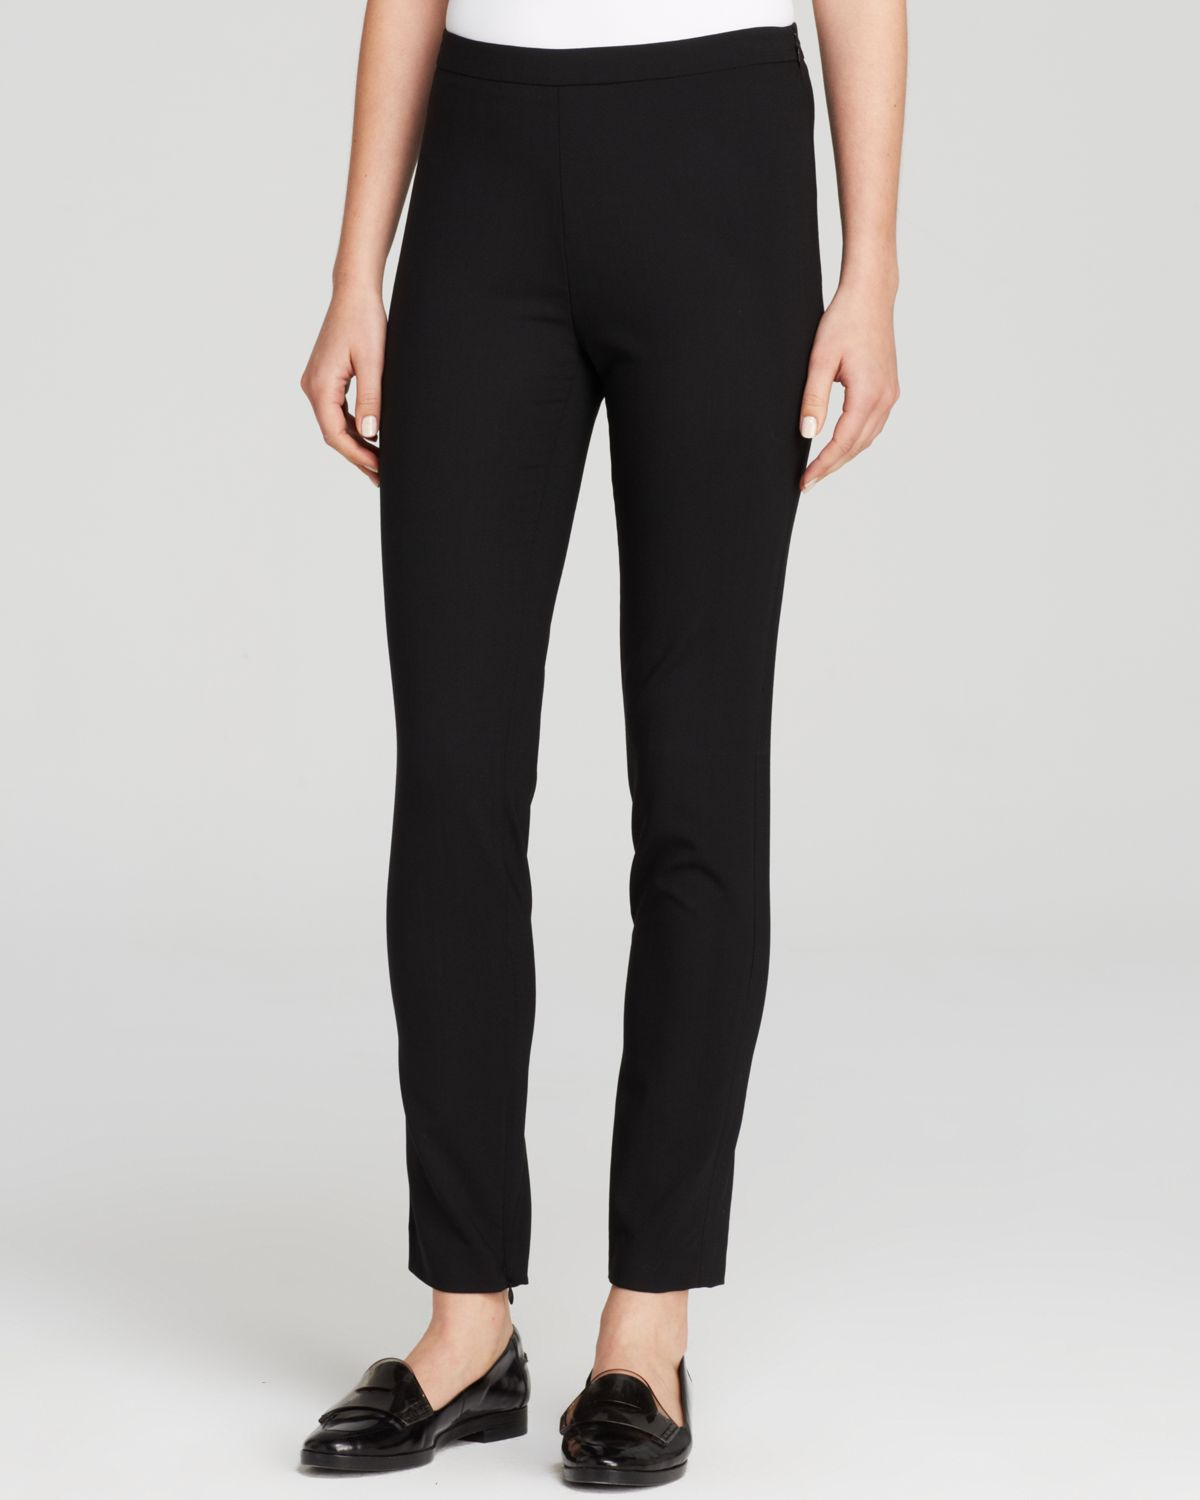 Theory Pants - High-waisted Skinny Edition in Black | Lyst